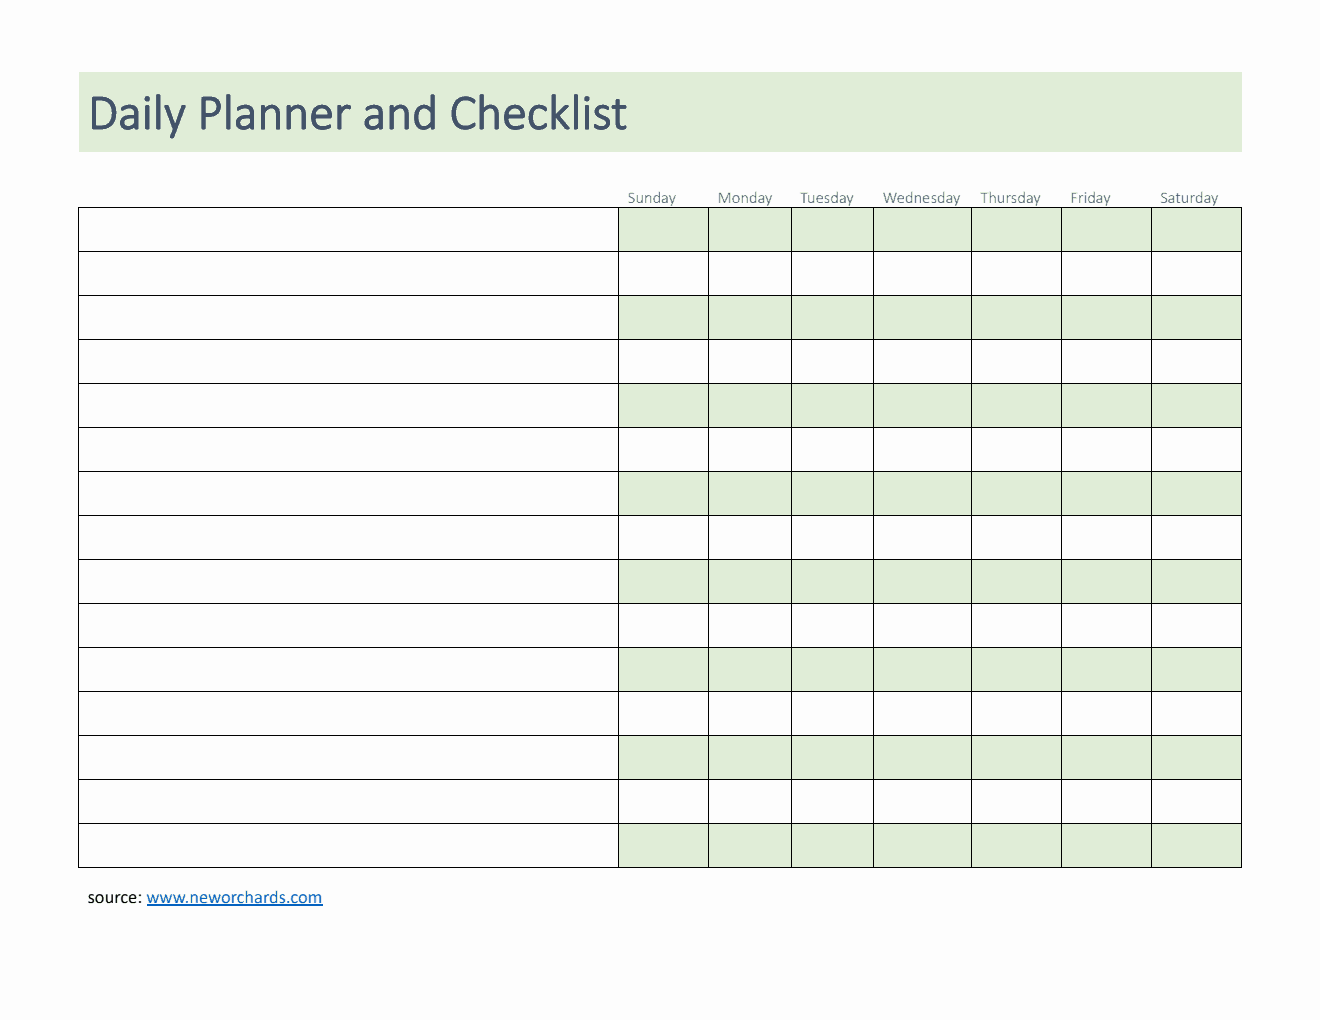 Daily Planner and Checklist Template in PDF (Downloadable)